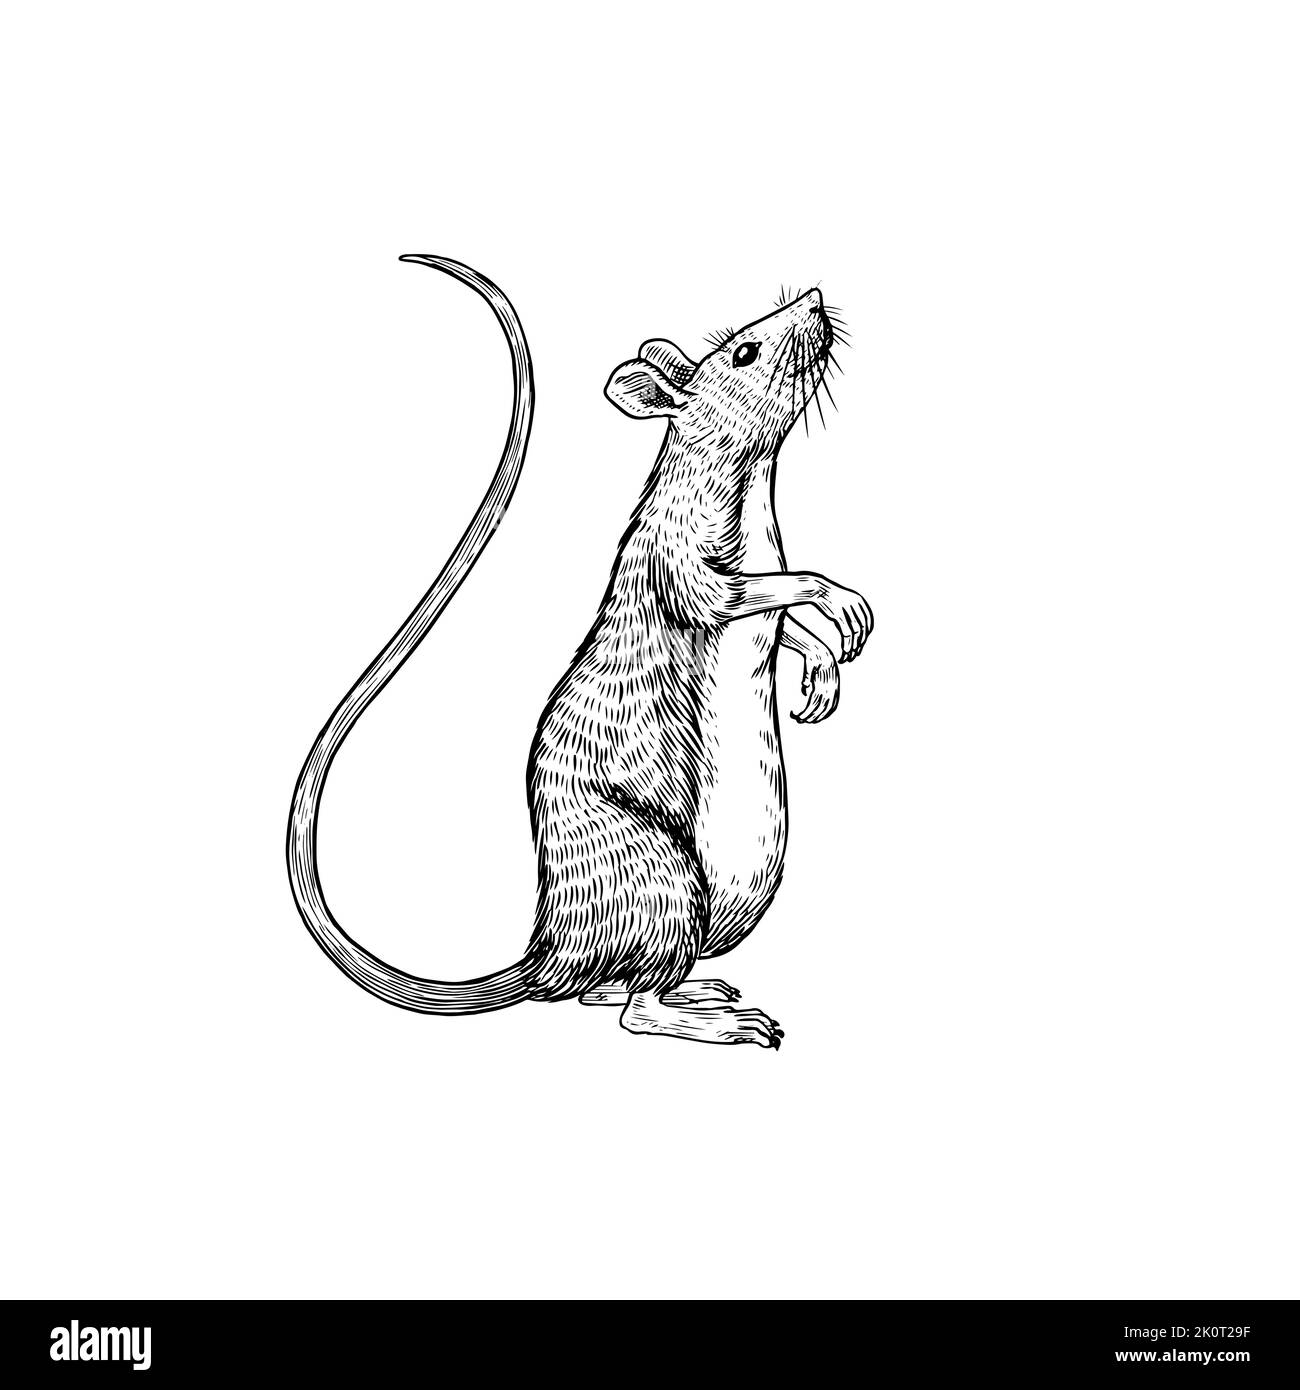 Rat or mouse. Graphic wild animal. Hand drawn vintage sketch. Engraved grunge elements. Stock Vector